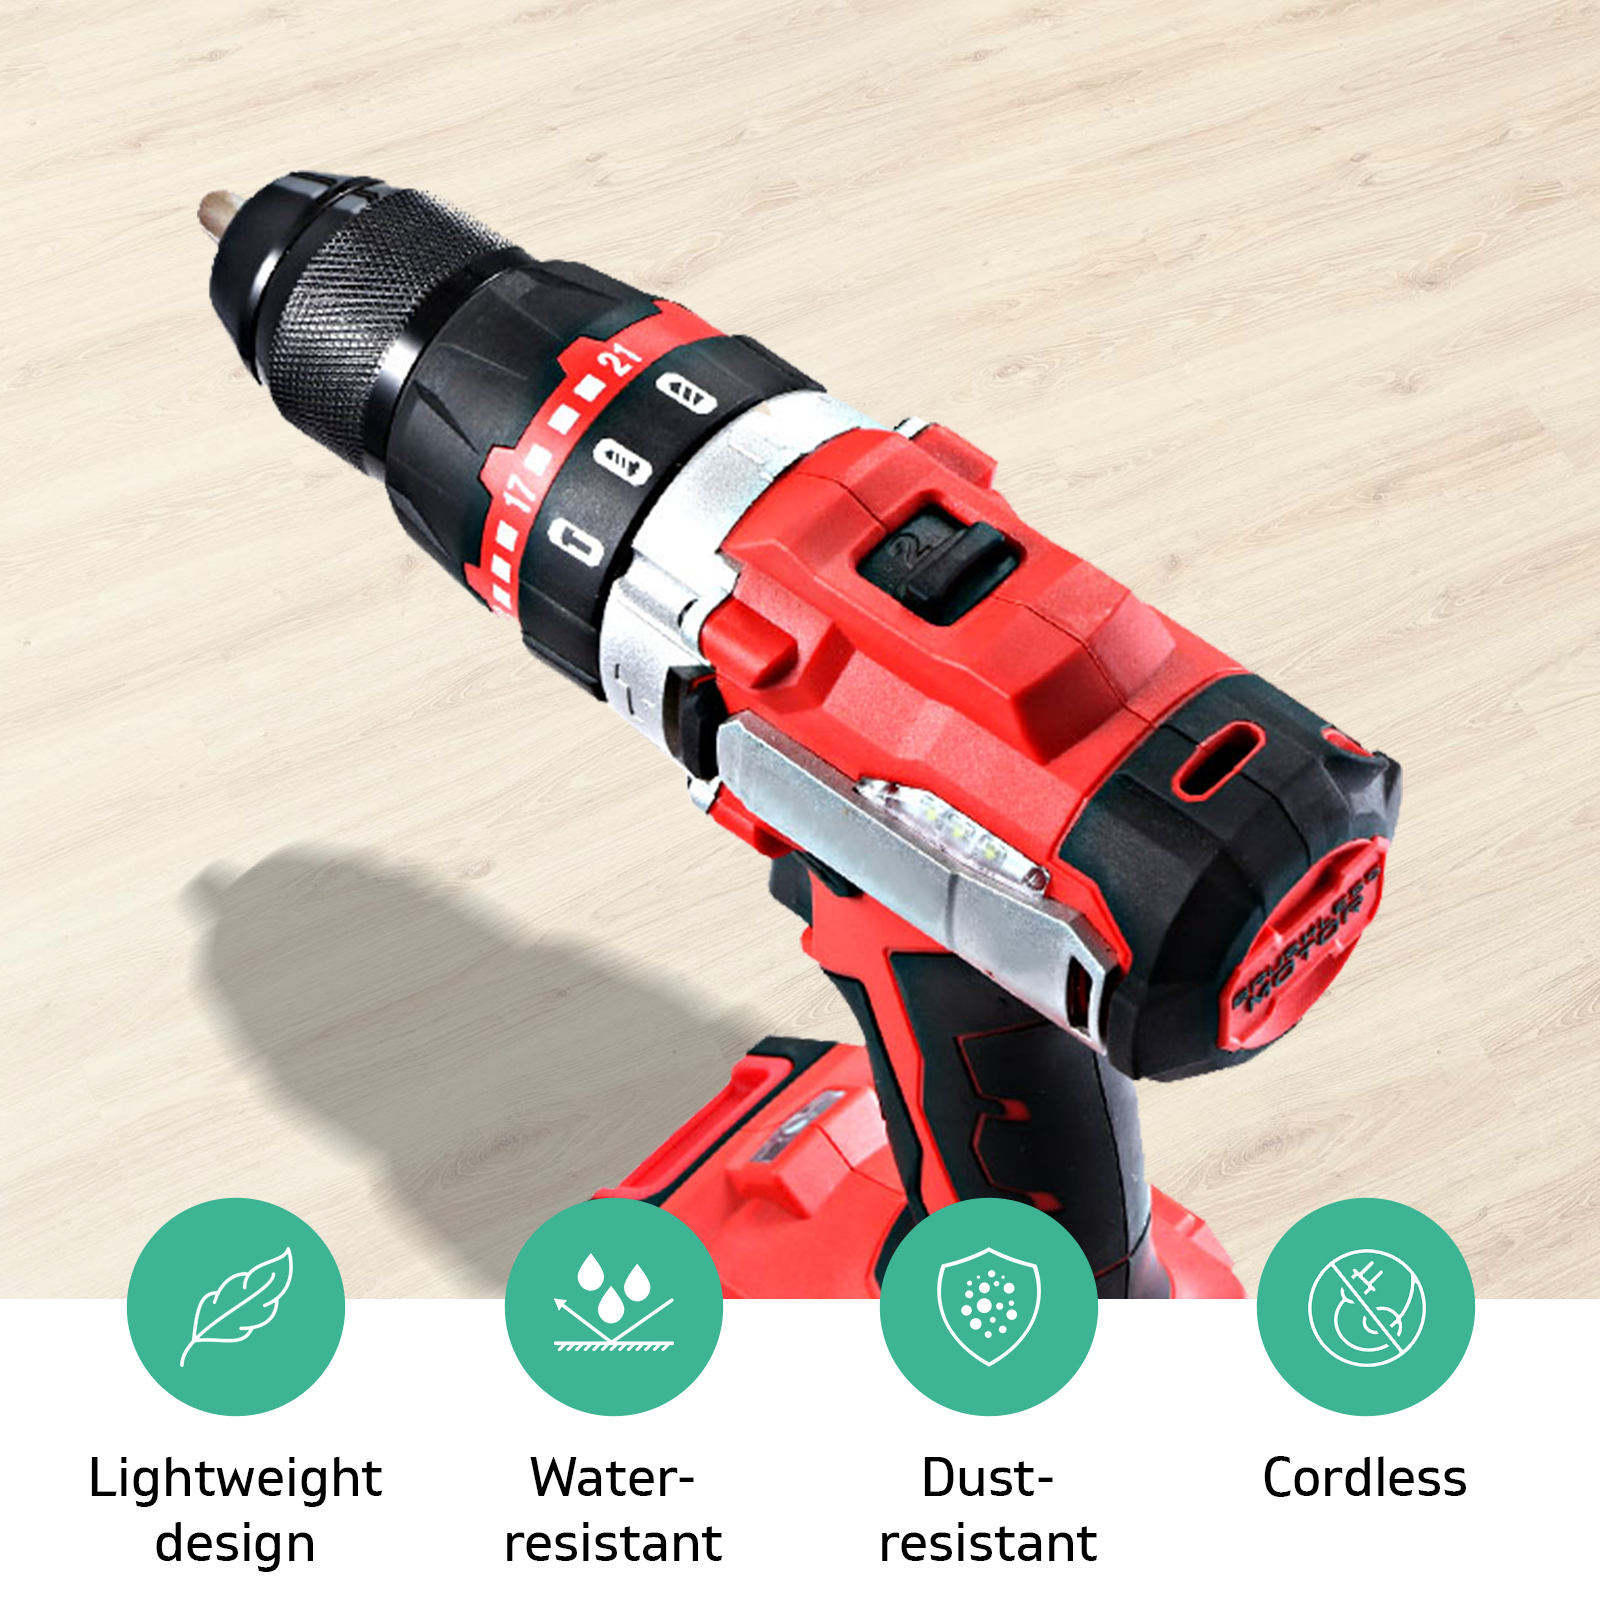 Electric Impact Drill 20V 1500mAh Lithium-ion Battery Cordless Lightweight